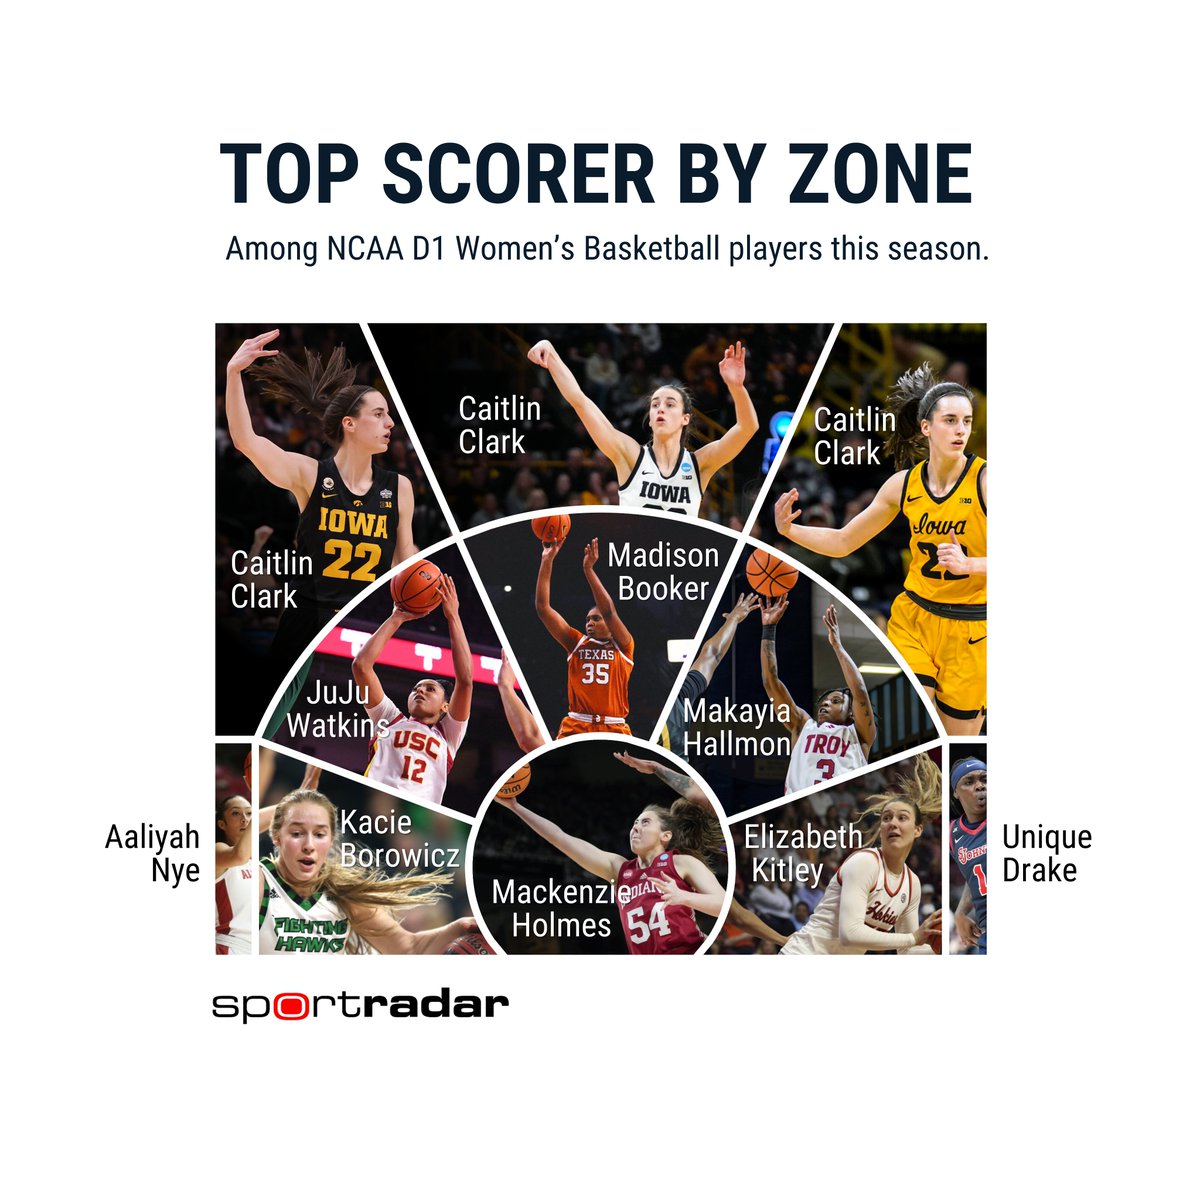 The top scorers by zone in women's college basketball this season: